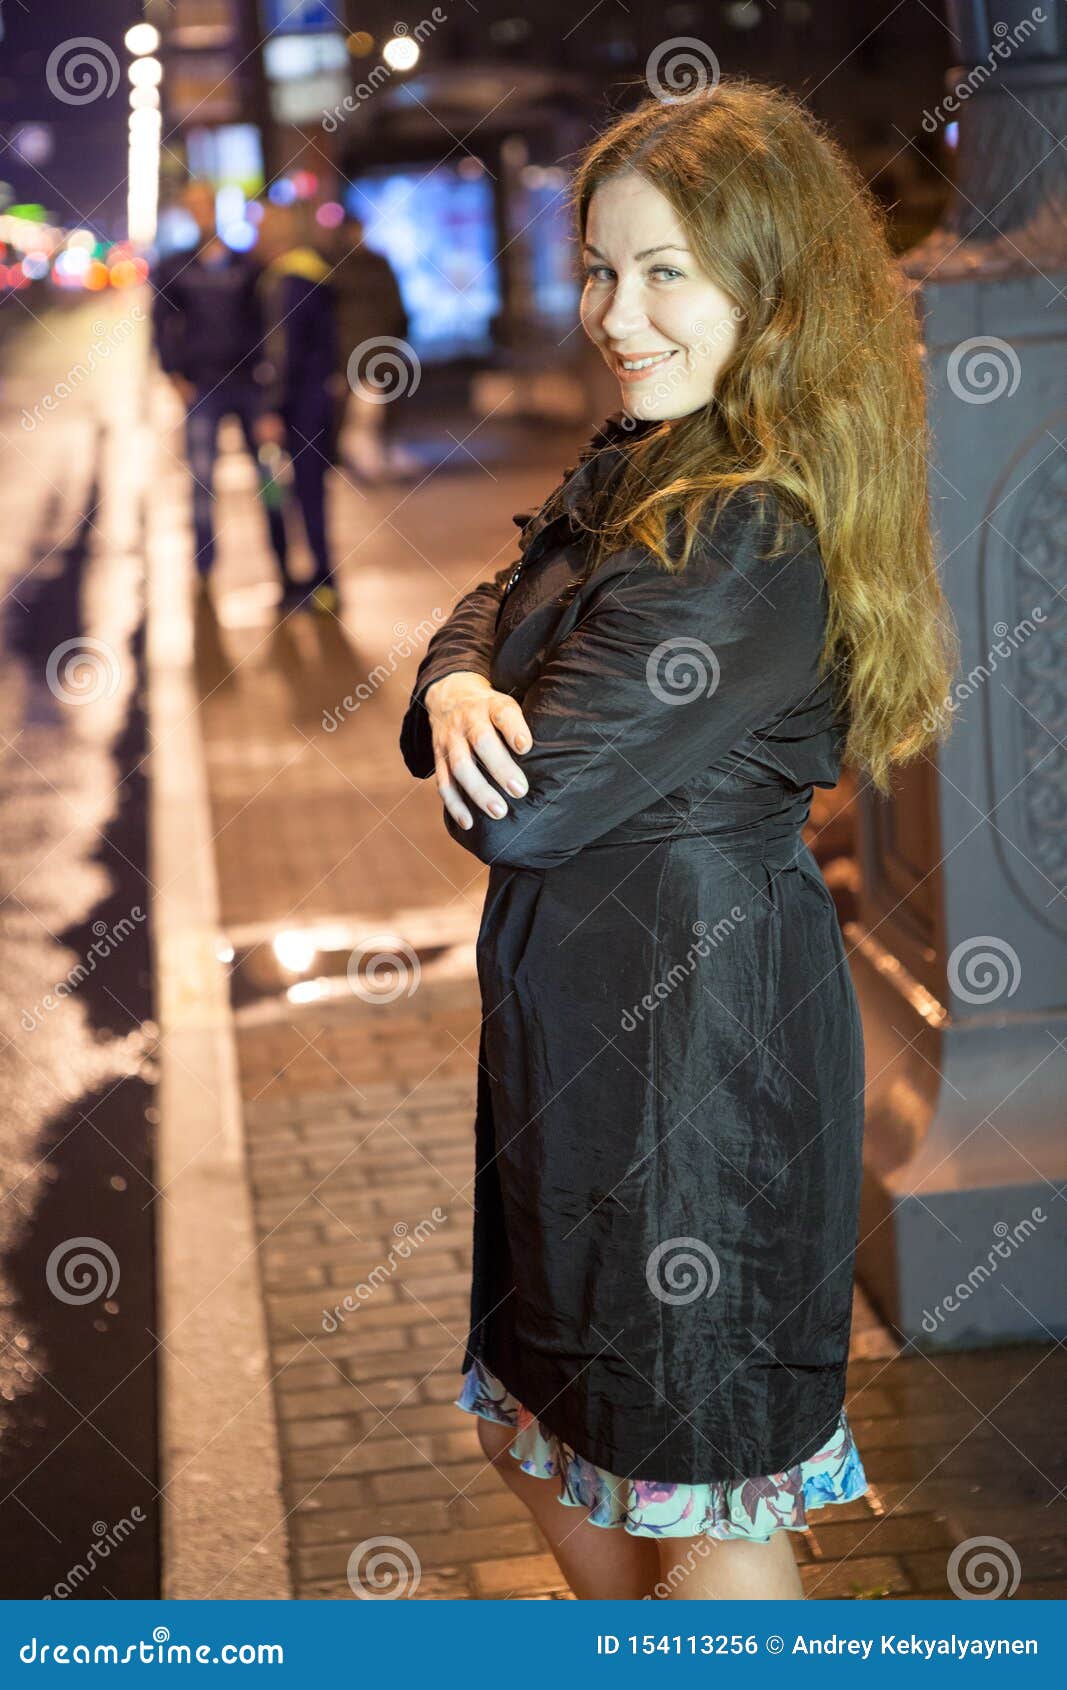 1067px x 1689px - Night Girl Prostitute Standing on Urban Street and Waiting for a Clients  Stock Photo - Image of evening, prostitute: 154113256